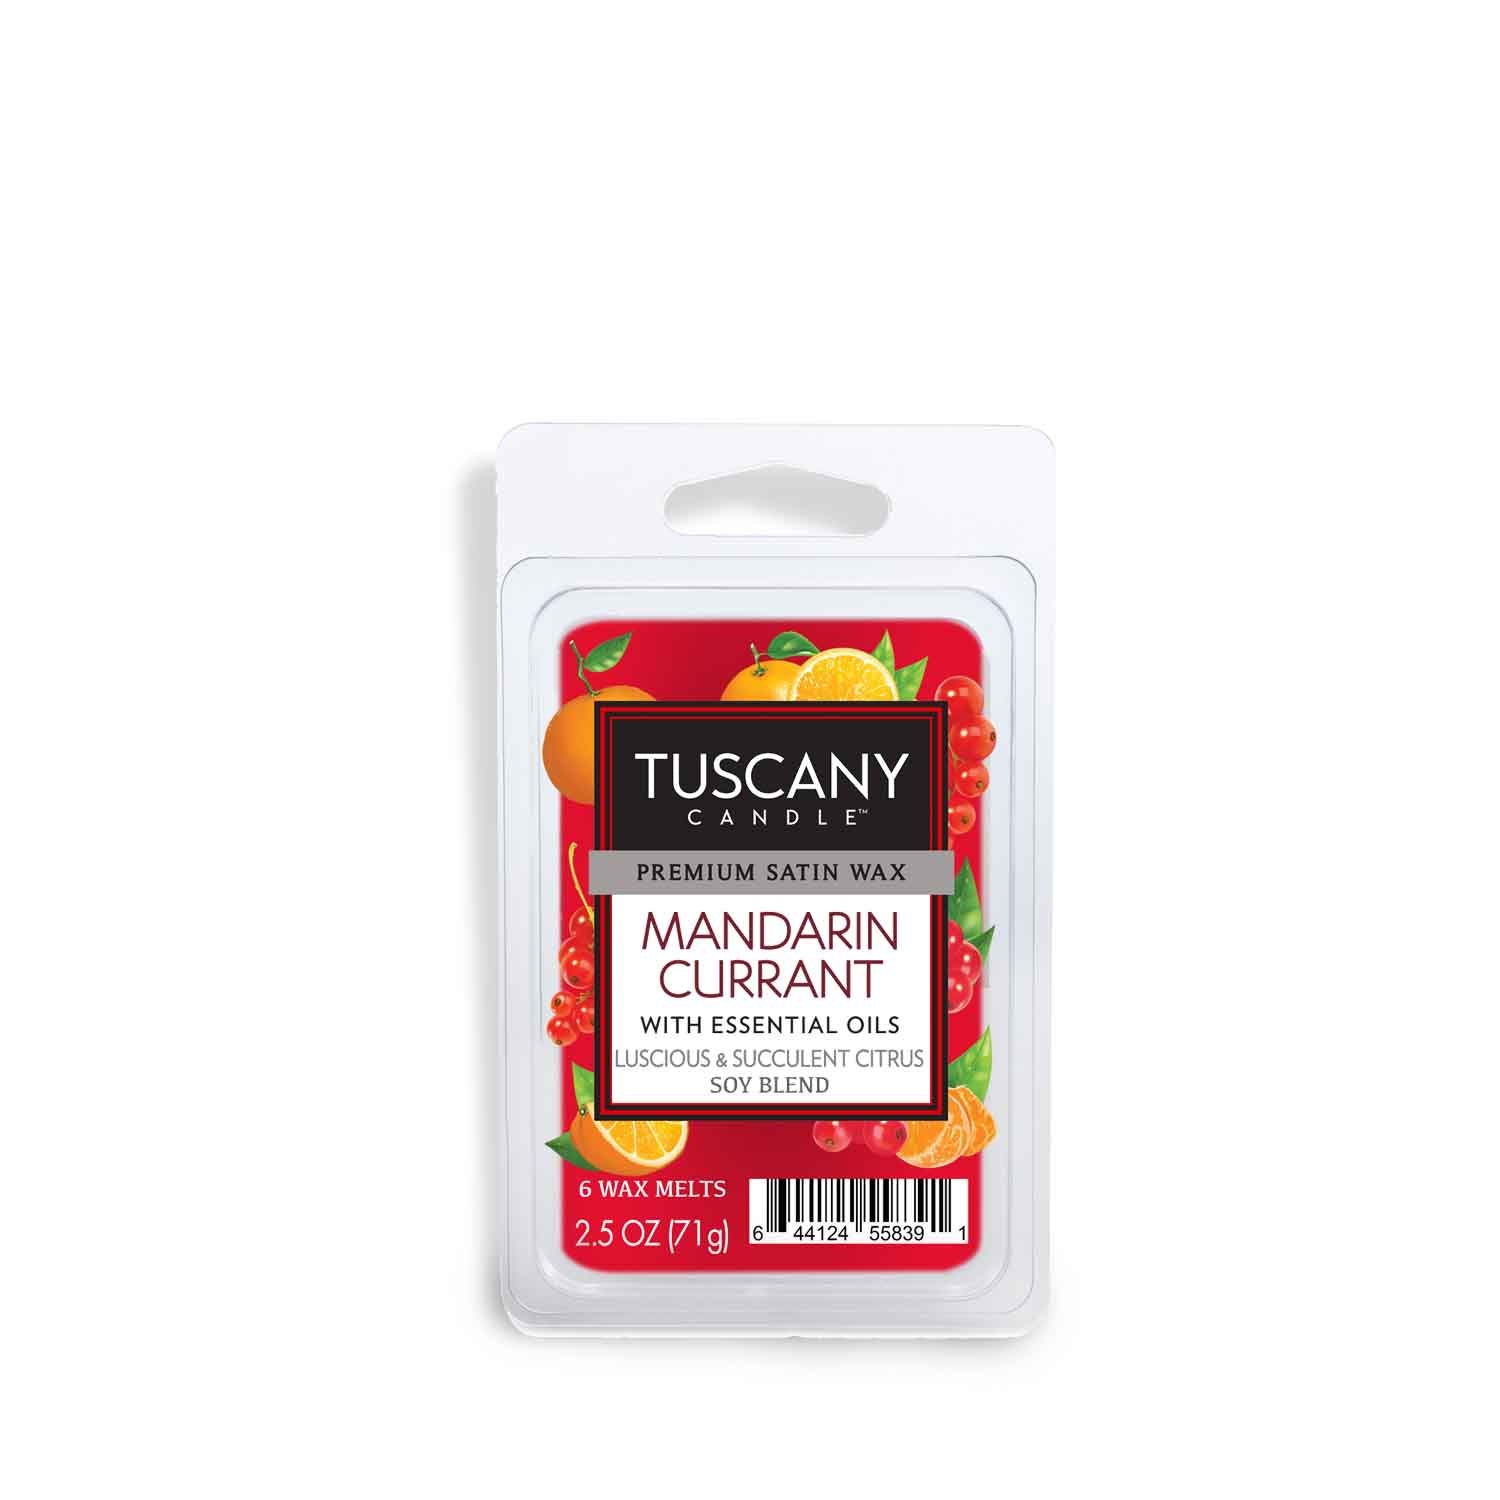 Tuscany Candle's Mandarin Currant Scented Wax Melt (2.5 oz) offers the perfect combination of fragrance and tranquility. Enjoy the luxurious scent of this claret Tuscany candle, melting away stress and filling your space with an enchanting aroma.